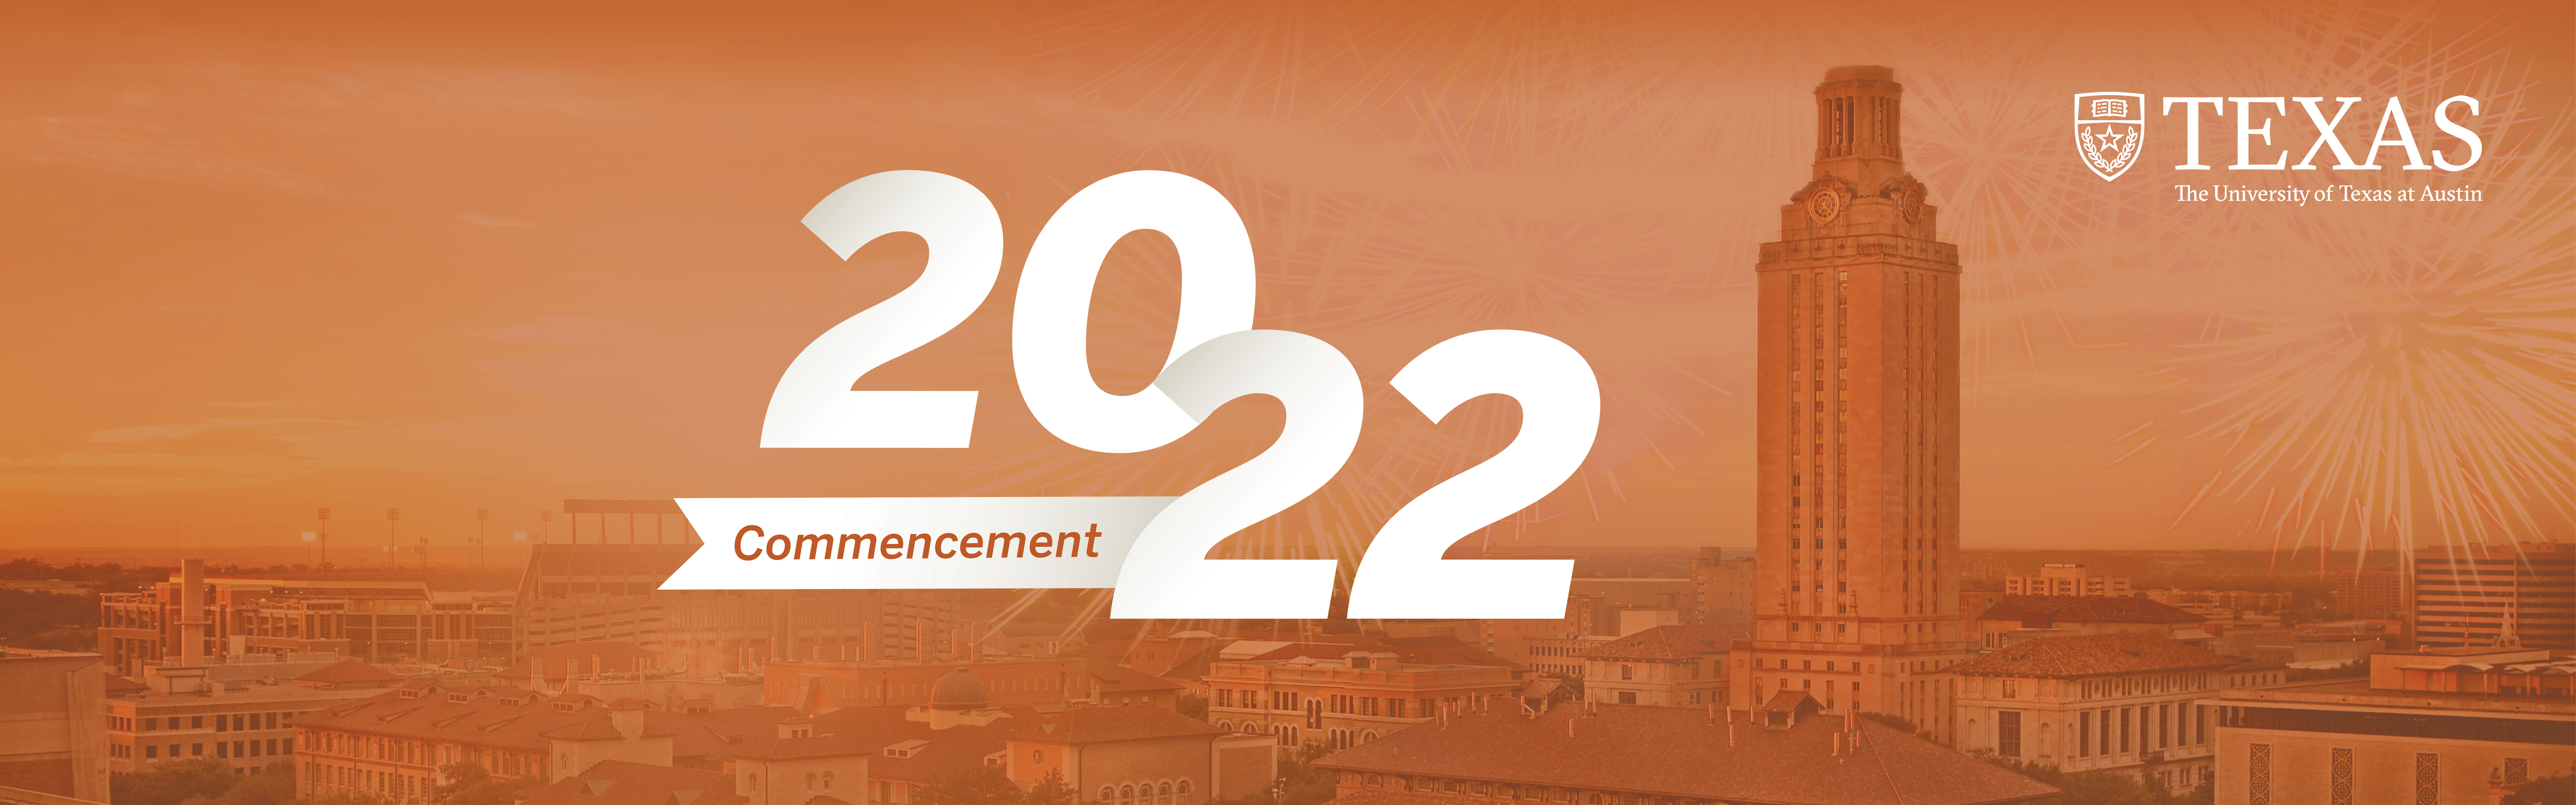 2022 Commencement Banner